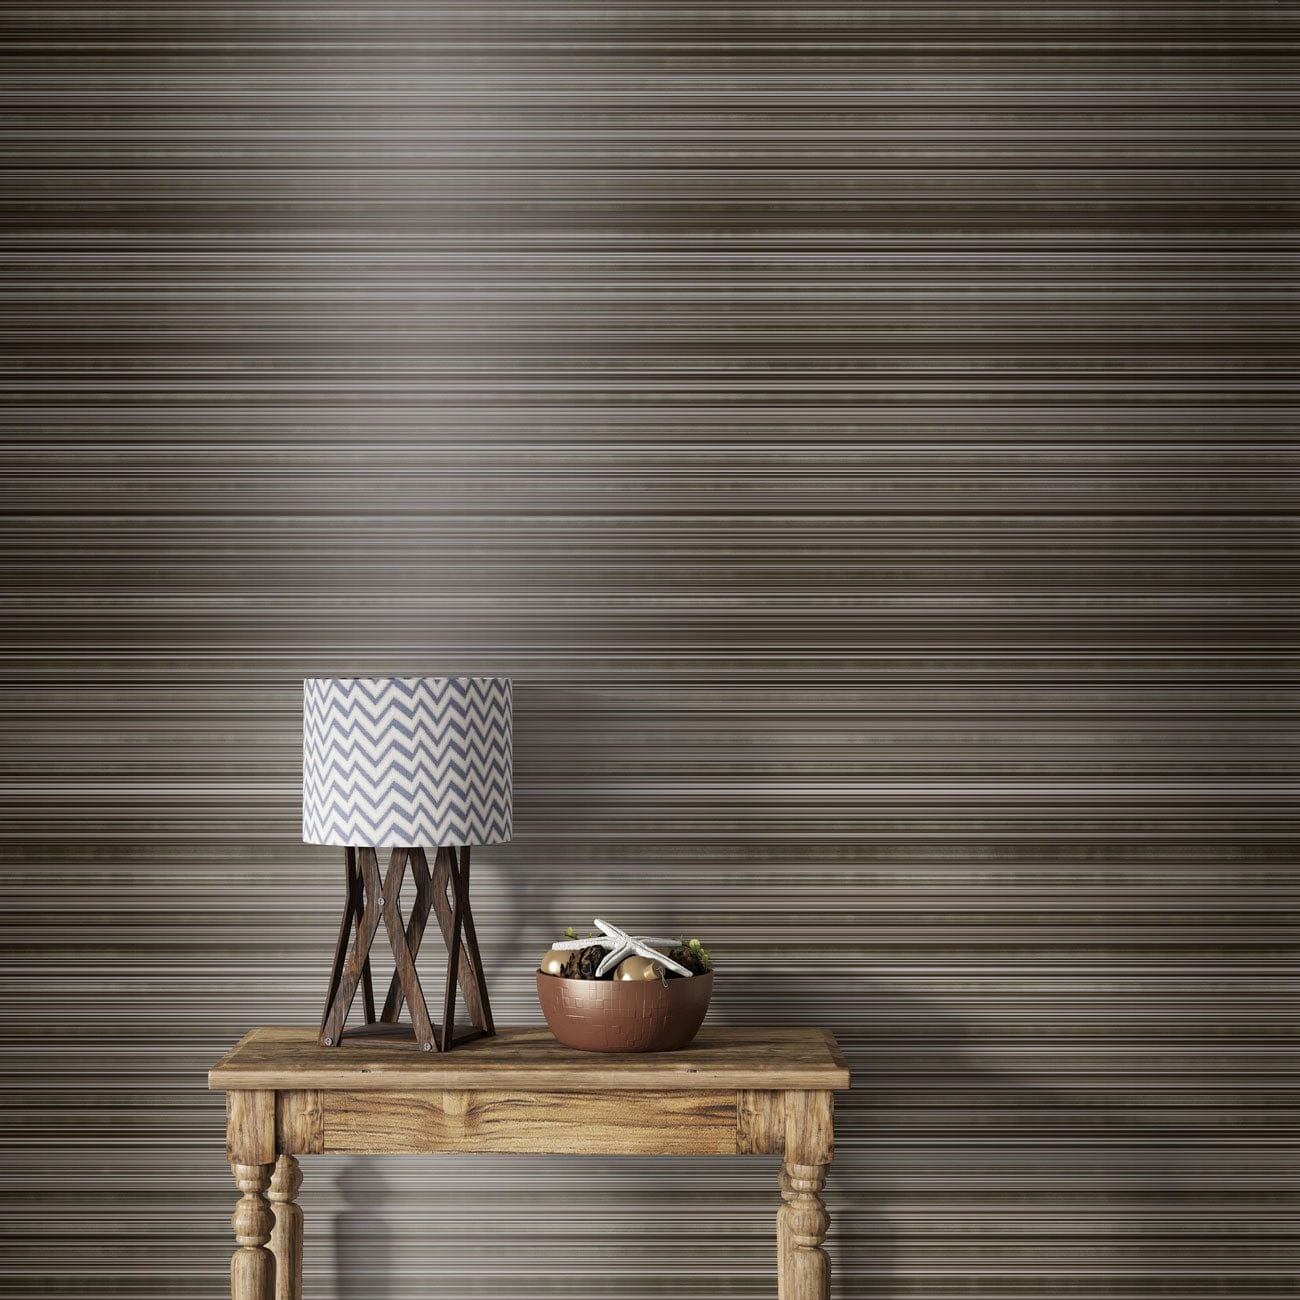 Wallpaper mural in brown with brushed metals for use in decorating the hallway